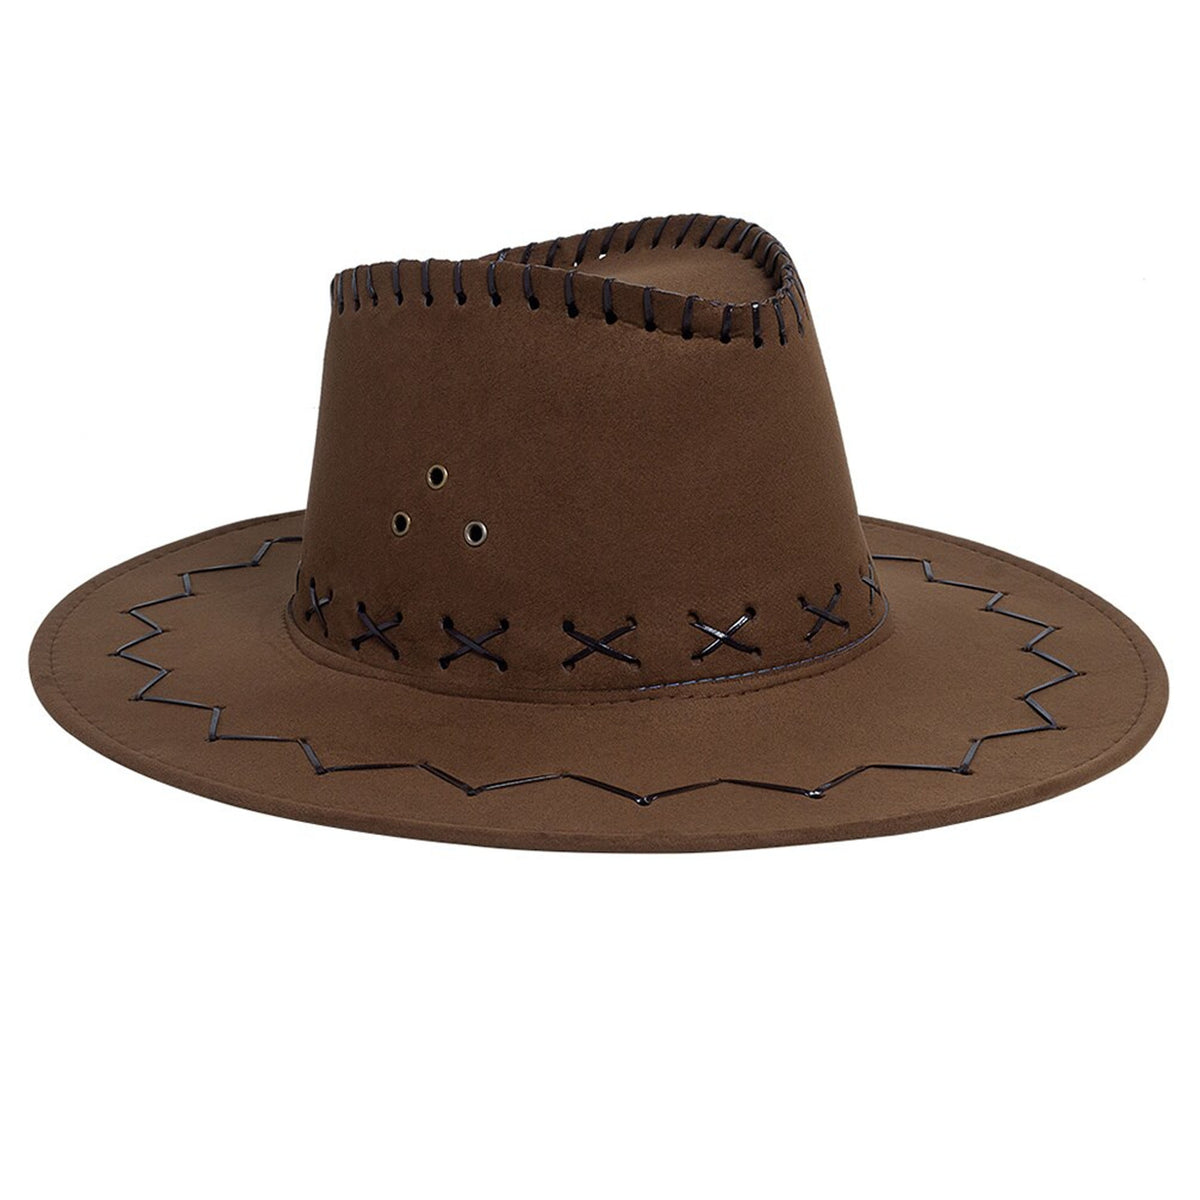 Wholesale   Light Brown Heavy Leather Style Western Cowboy Hat For Men's(Sold by the piece or dozen)